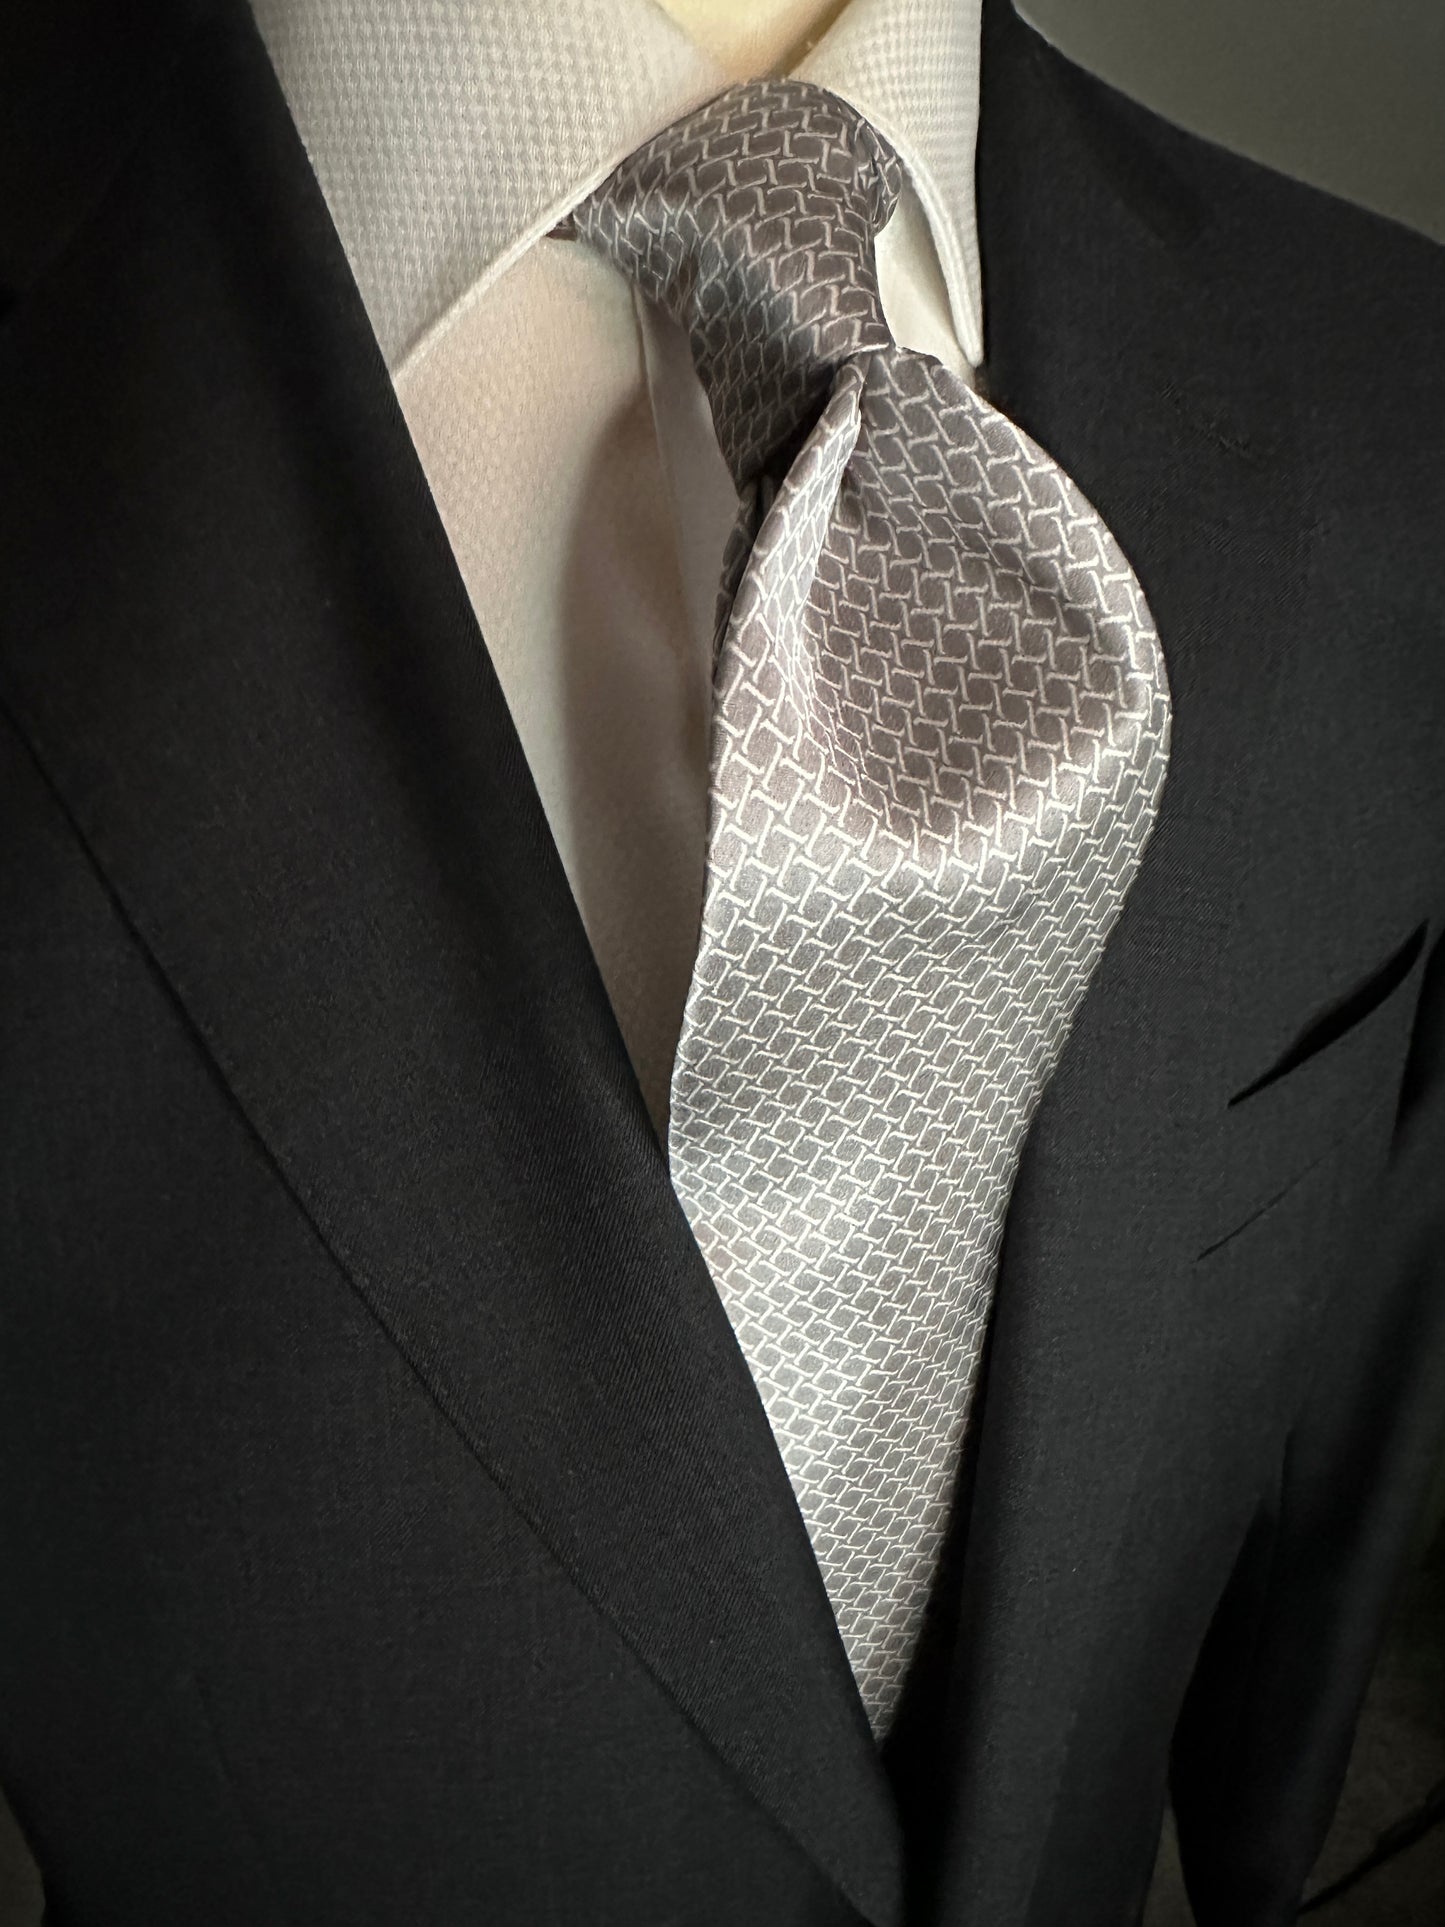 This satin finish 100% silk necktie has a very interesting all over geometric pattern of interlocking white links almost chain link in style. The silk is very smooth to the touch and has a natural luster that shines in certain light. This is a serious tie. Great for those business meetings, court dates, daytime or evening events, and all around more formal attire. This is best paired with a fancy white or tone on tone white dress shirt.